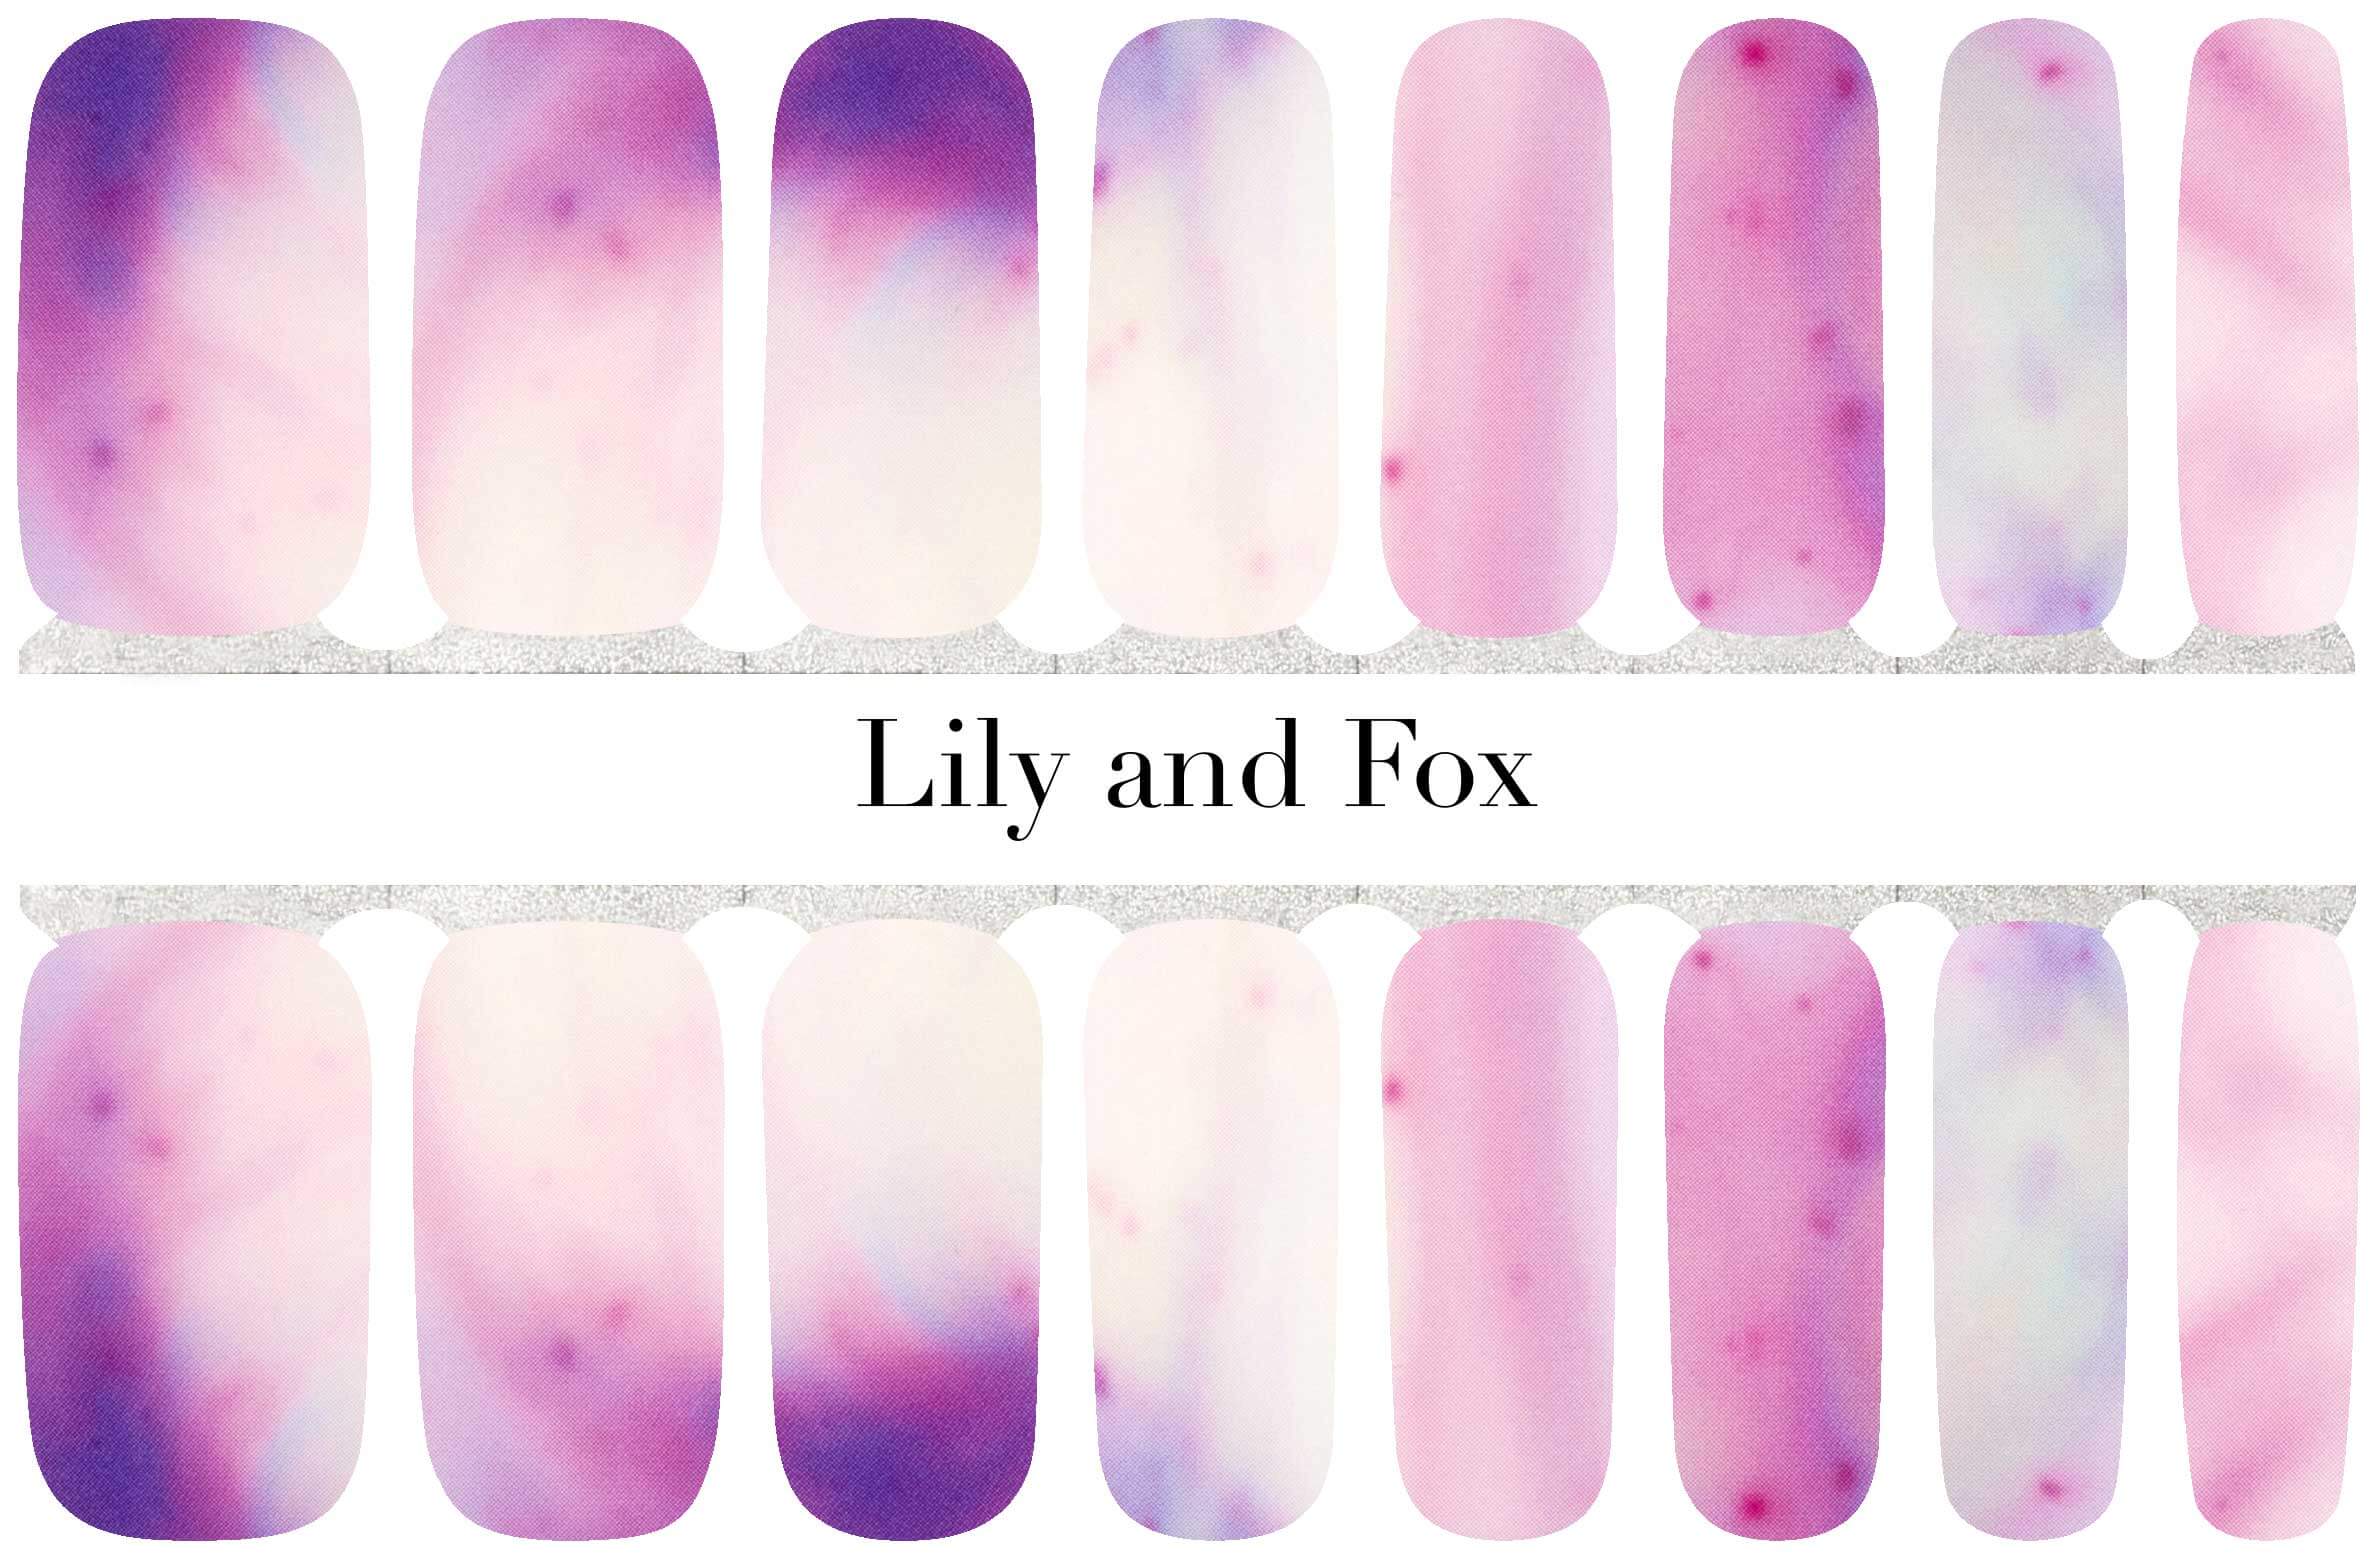 Jack-O-Lantern (Glow) Nail Wraps Online Shop - Lily and Fox - Lily and Fox  USA